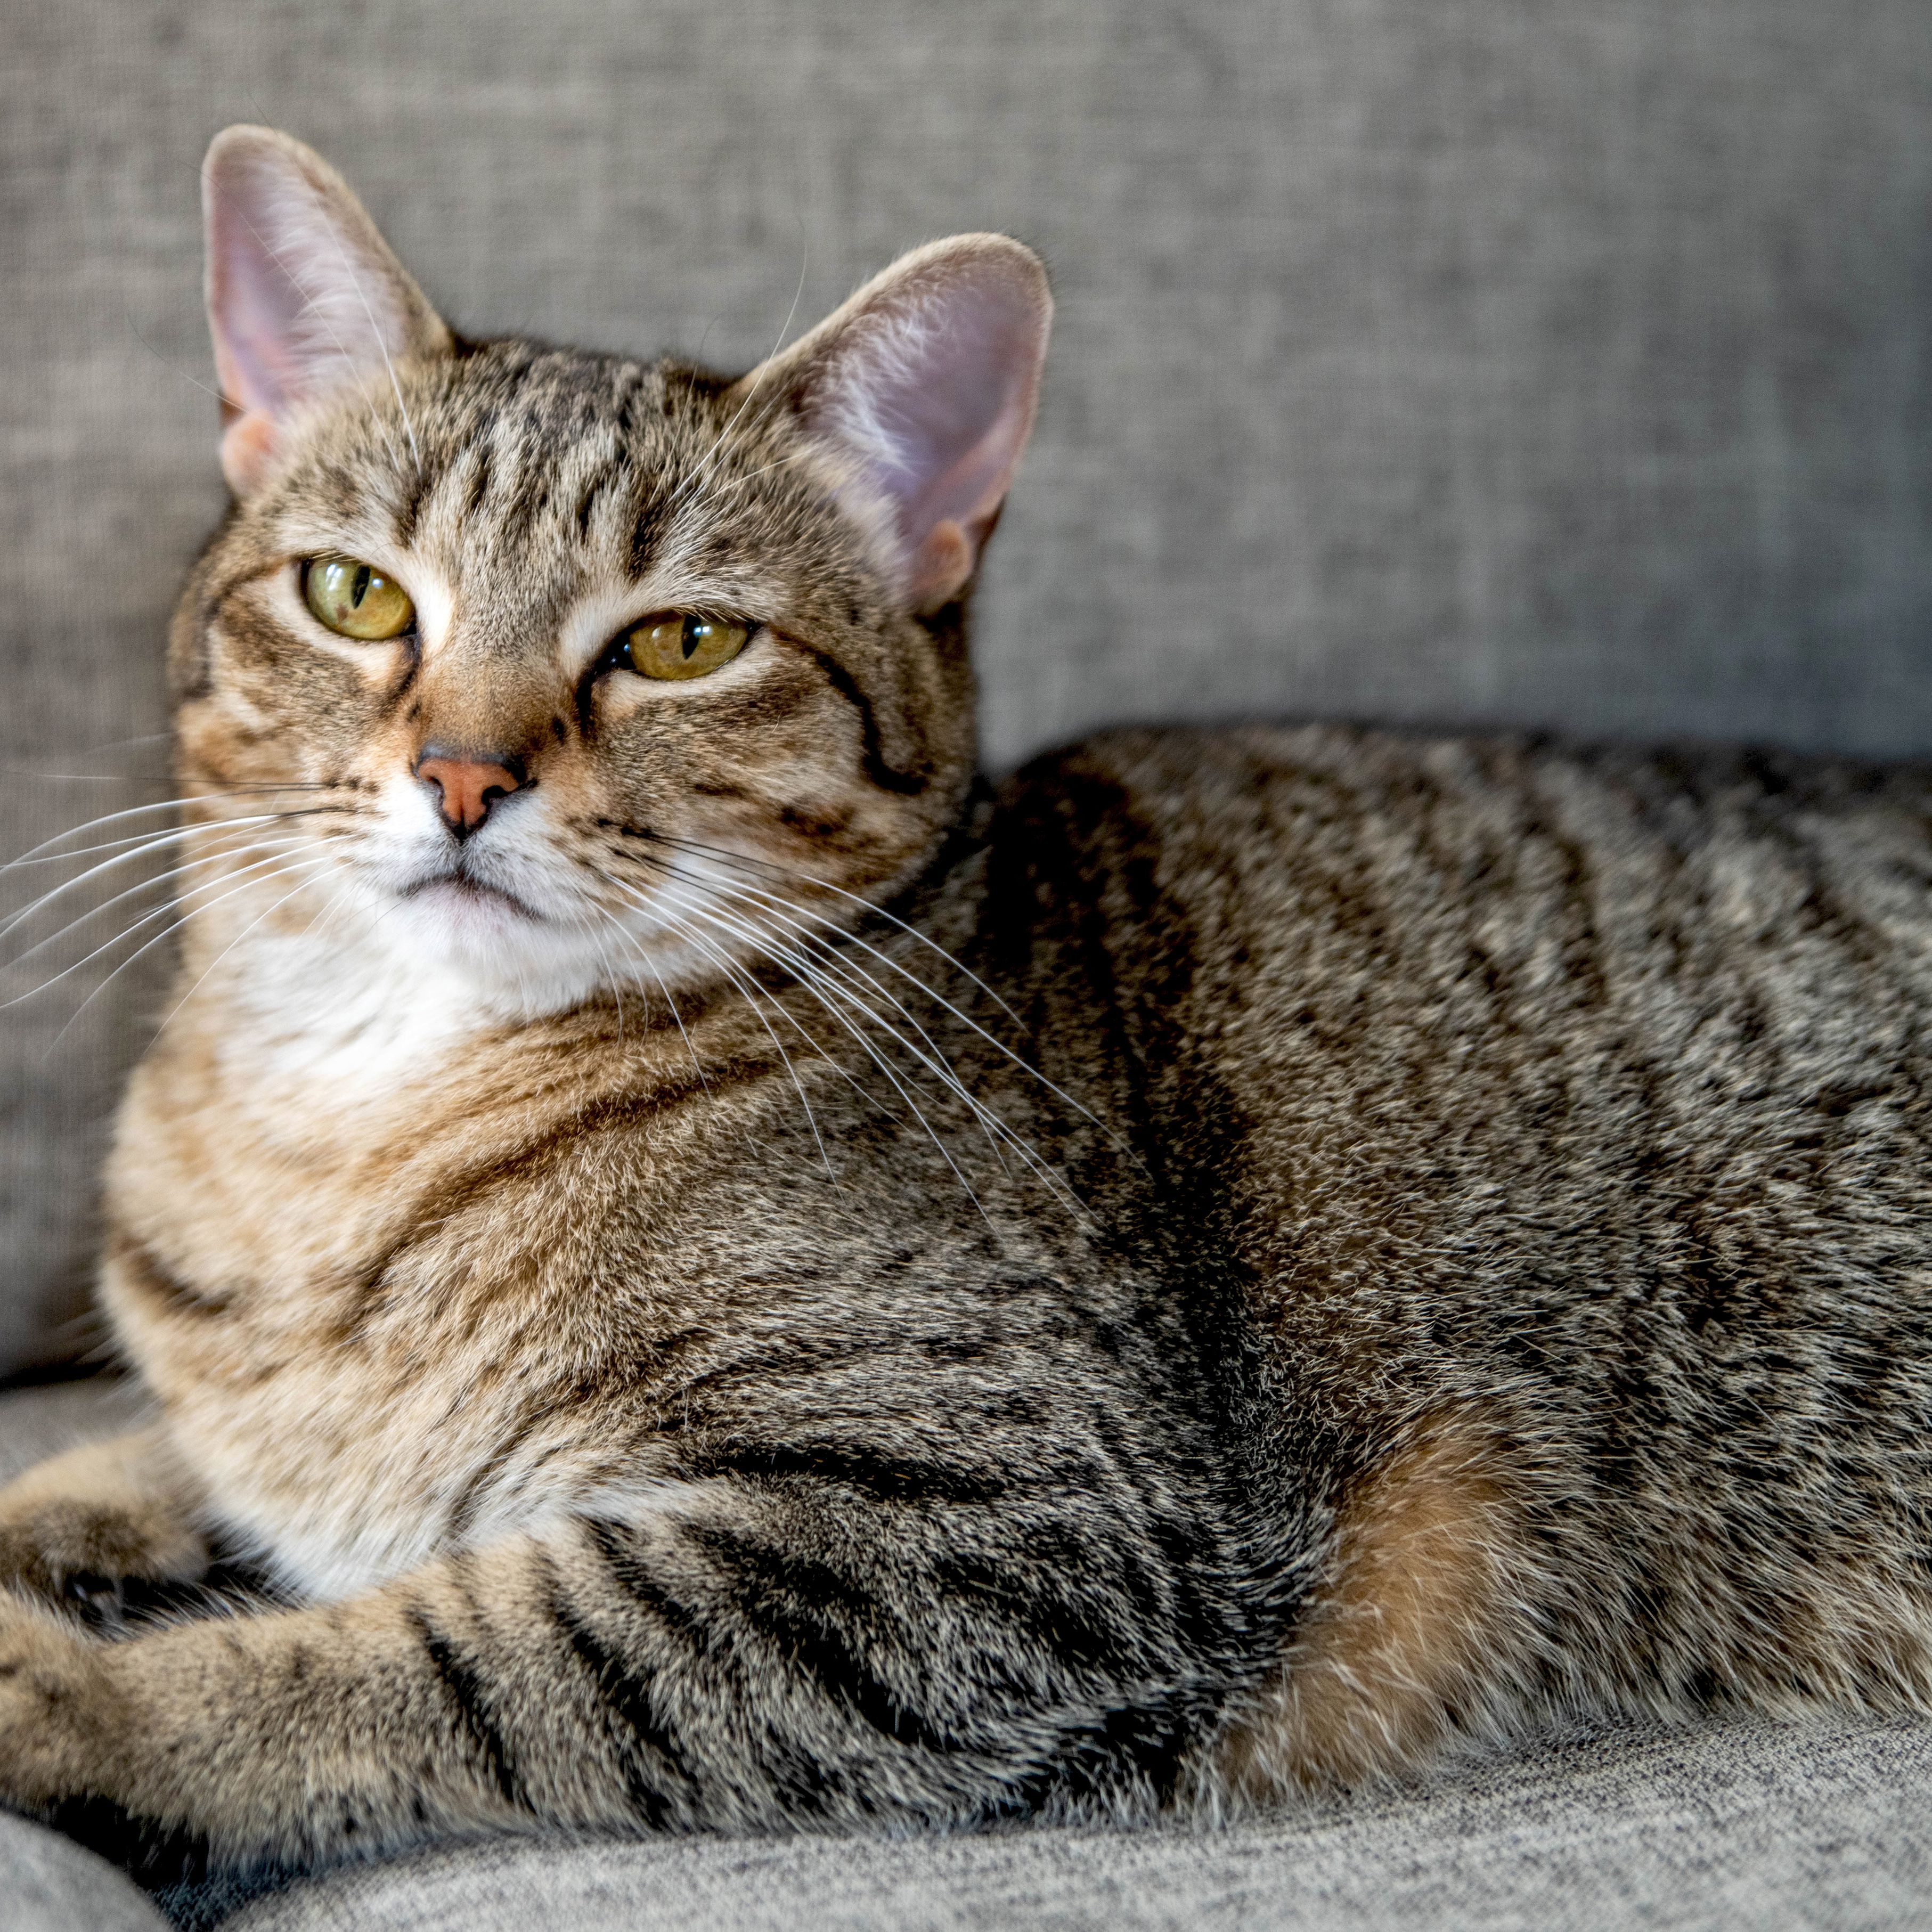 All About Tabby Cats and Their Color Patterns